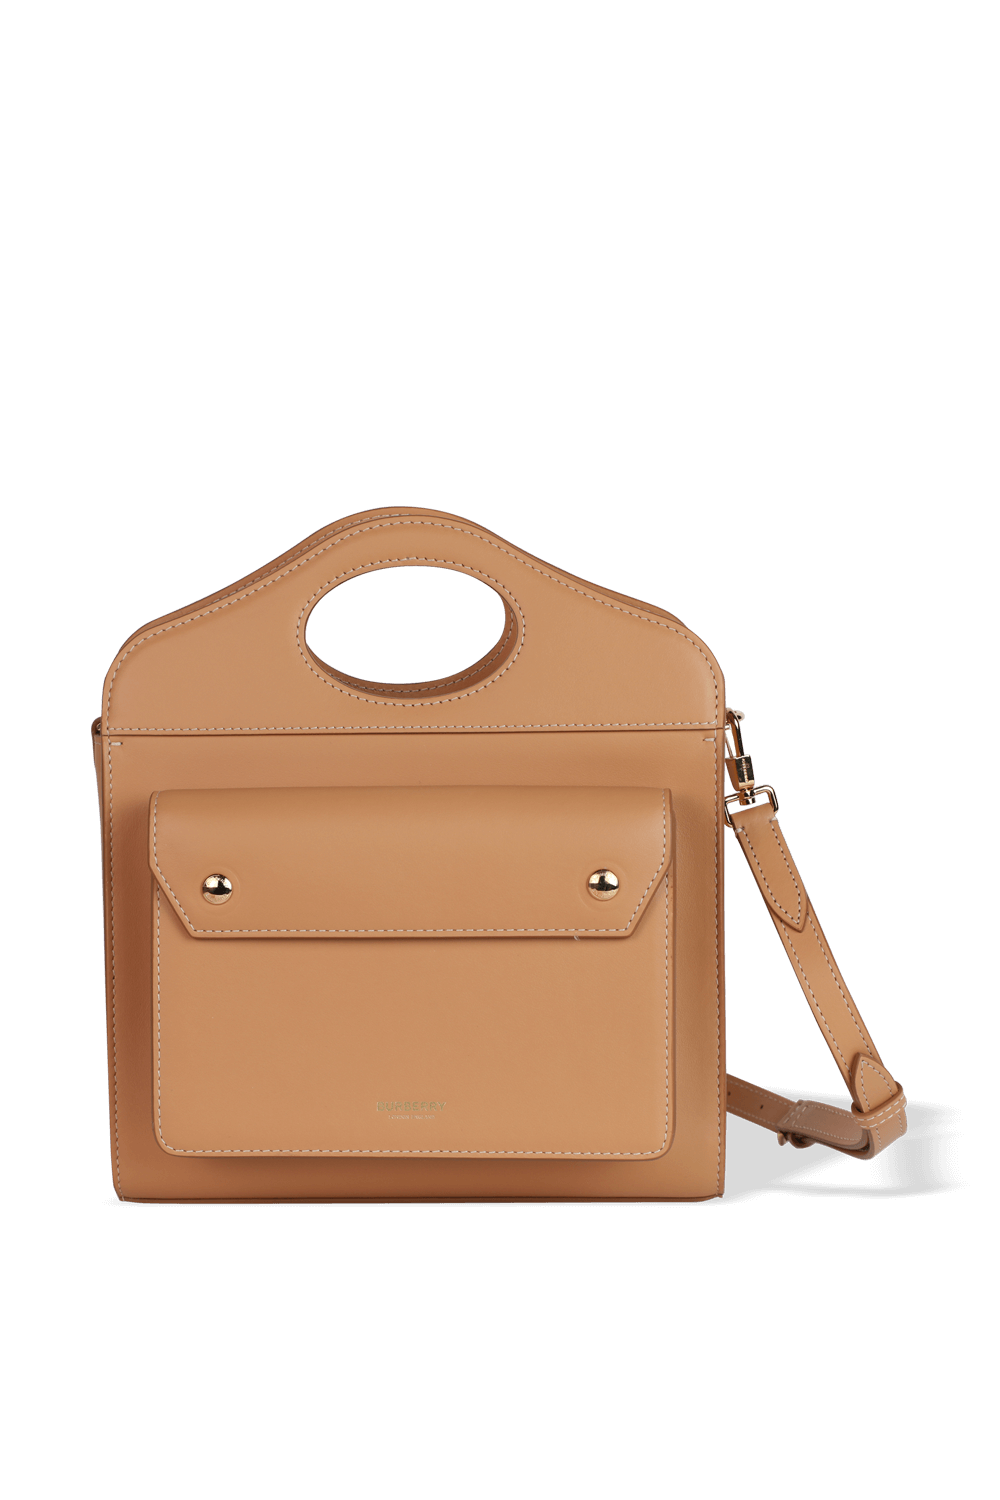 Mini Topstitched Leather Pocket Bag in Warm Sand BURBERRY